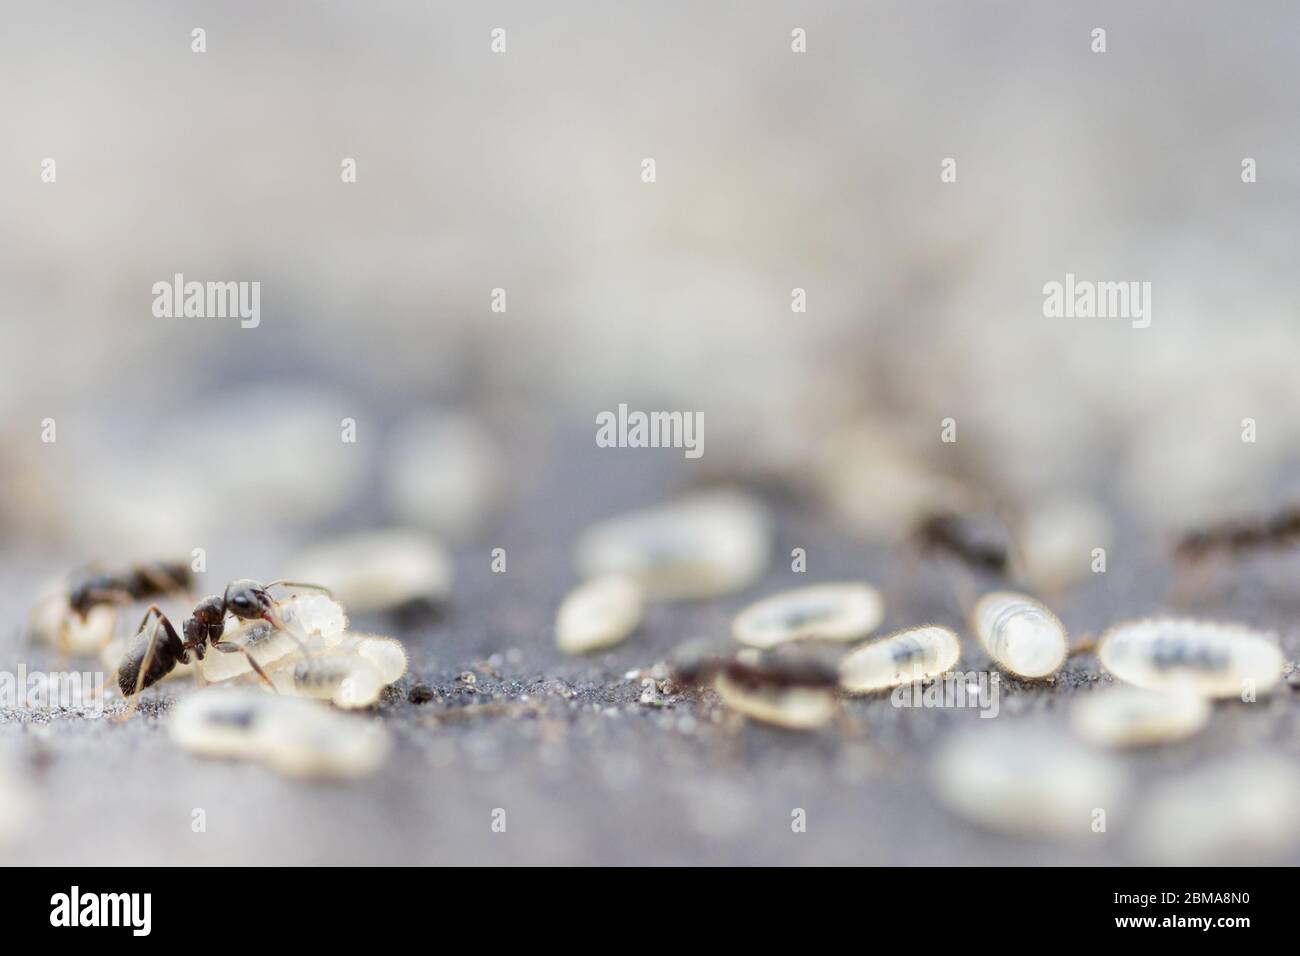 ant drags a chrysalis into an ant hill Stock Photo